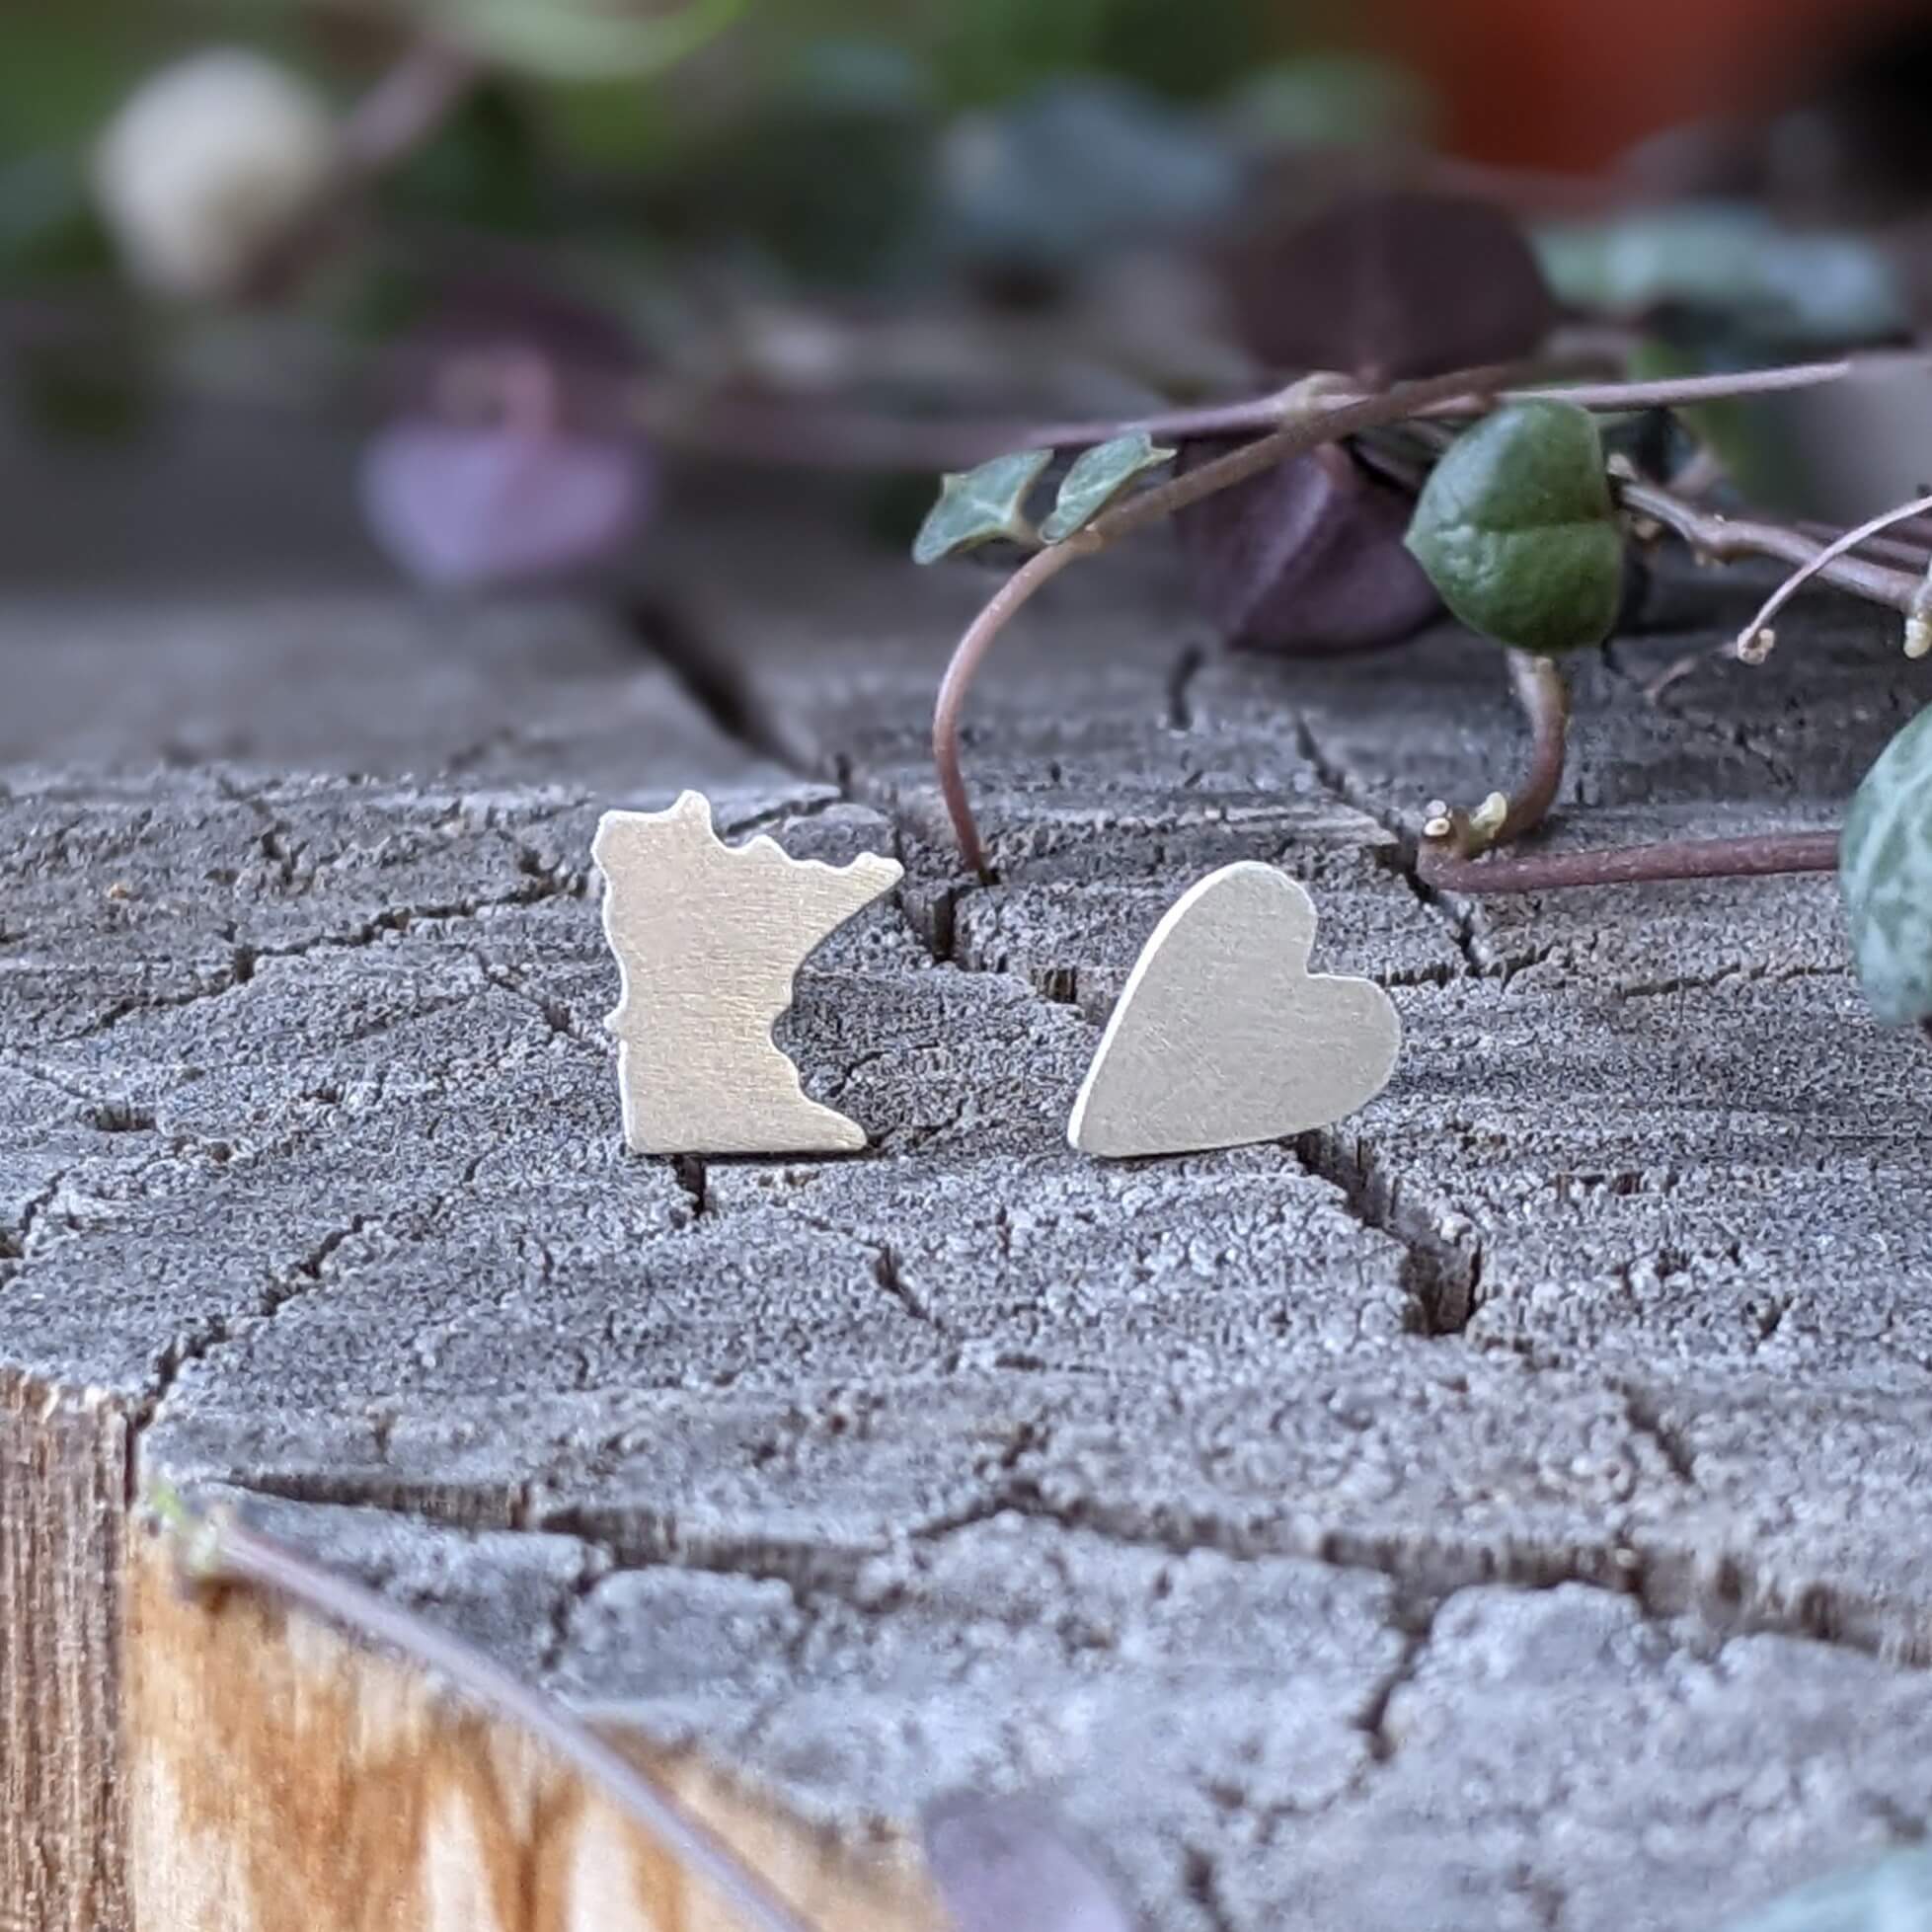 Mis-matched stud earrings in sterling silver. One earring is shaped like the state of Minnesota and the other is shaped like a heart.